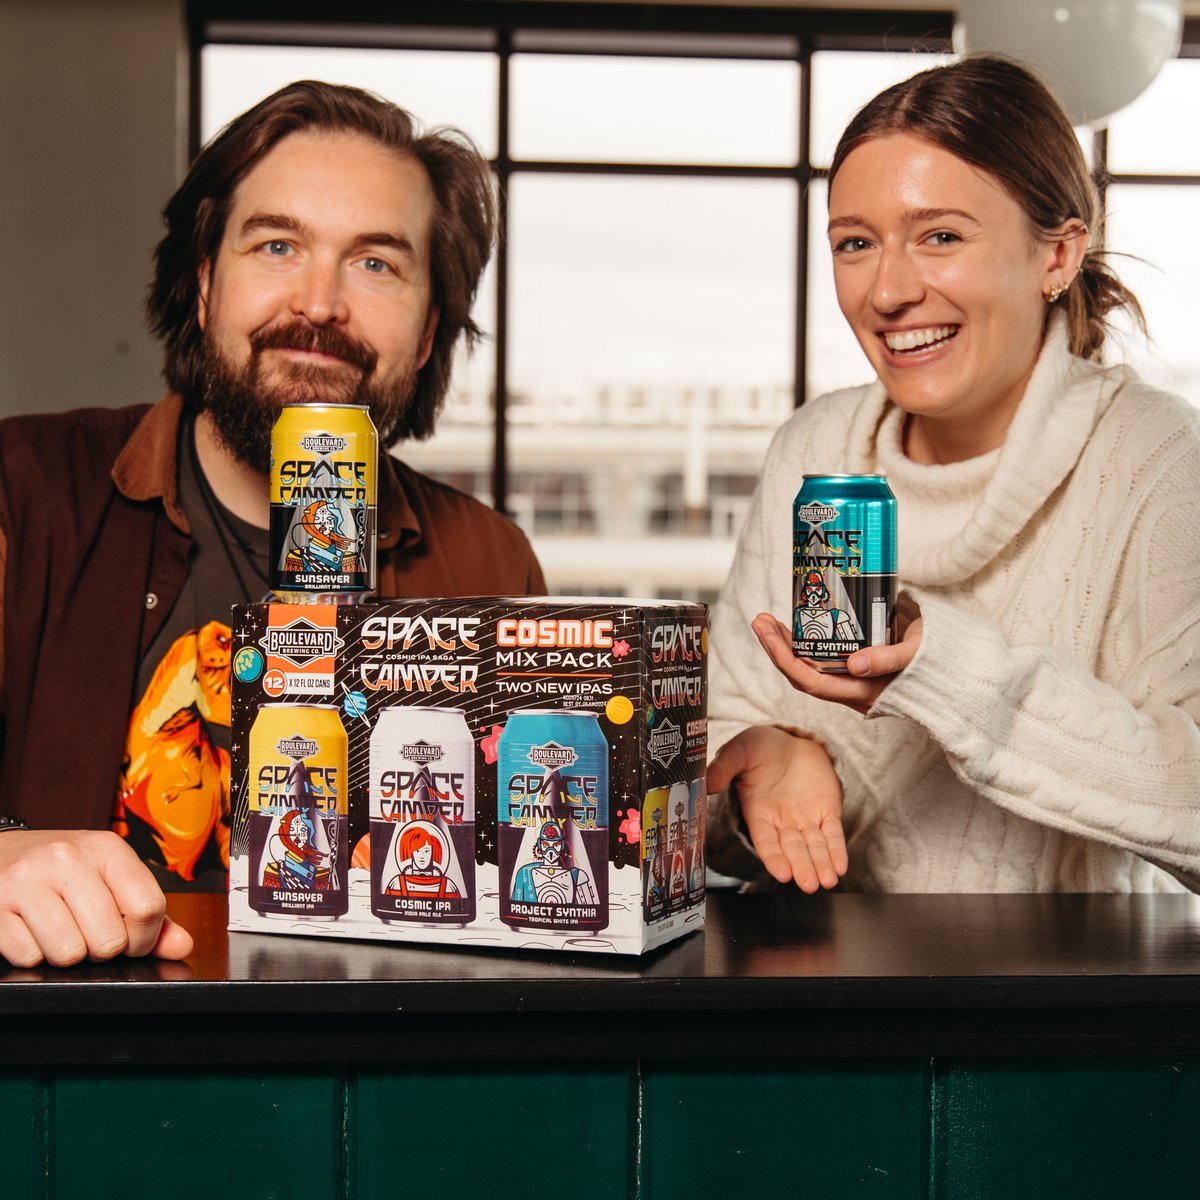 Join Graphic Designers Wesley & Jadie on the BLVD Brewcast! We'll dive into the newest Space Camper Cosmic Mix Pack along with Microbiologist, Michelle, & discuss design inspiration, the Space Camper universe, & fantastic yeasts & where to find them. 🎧 boulevard.com/brewcast